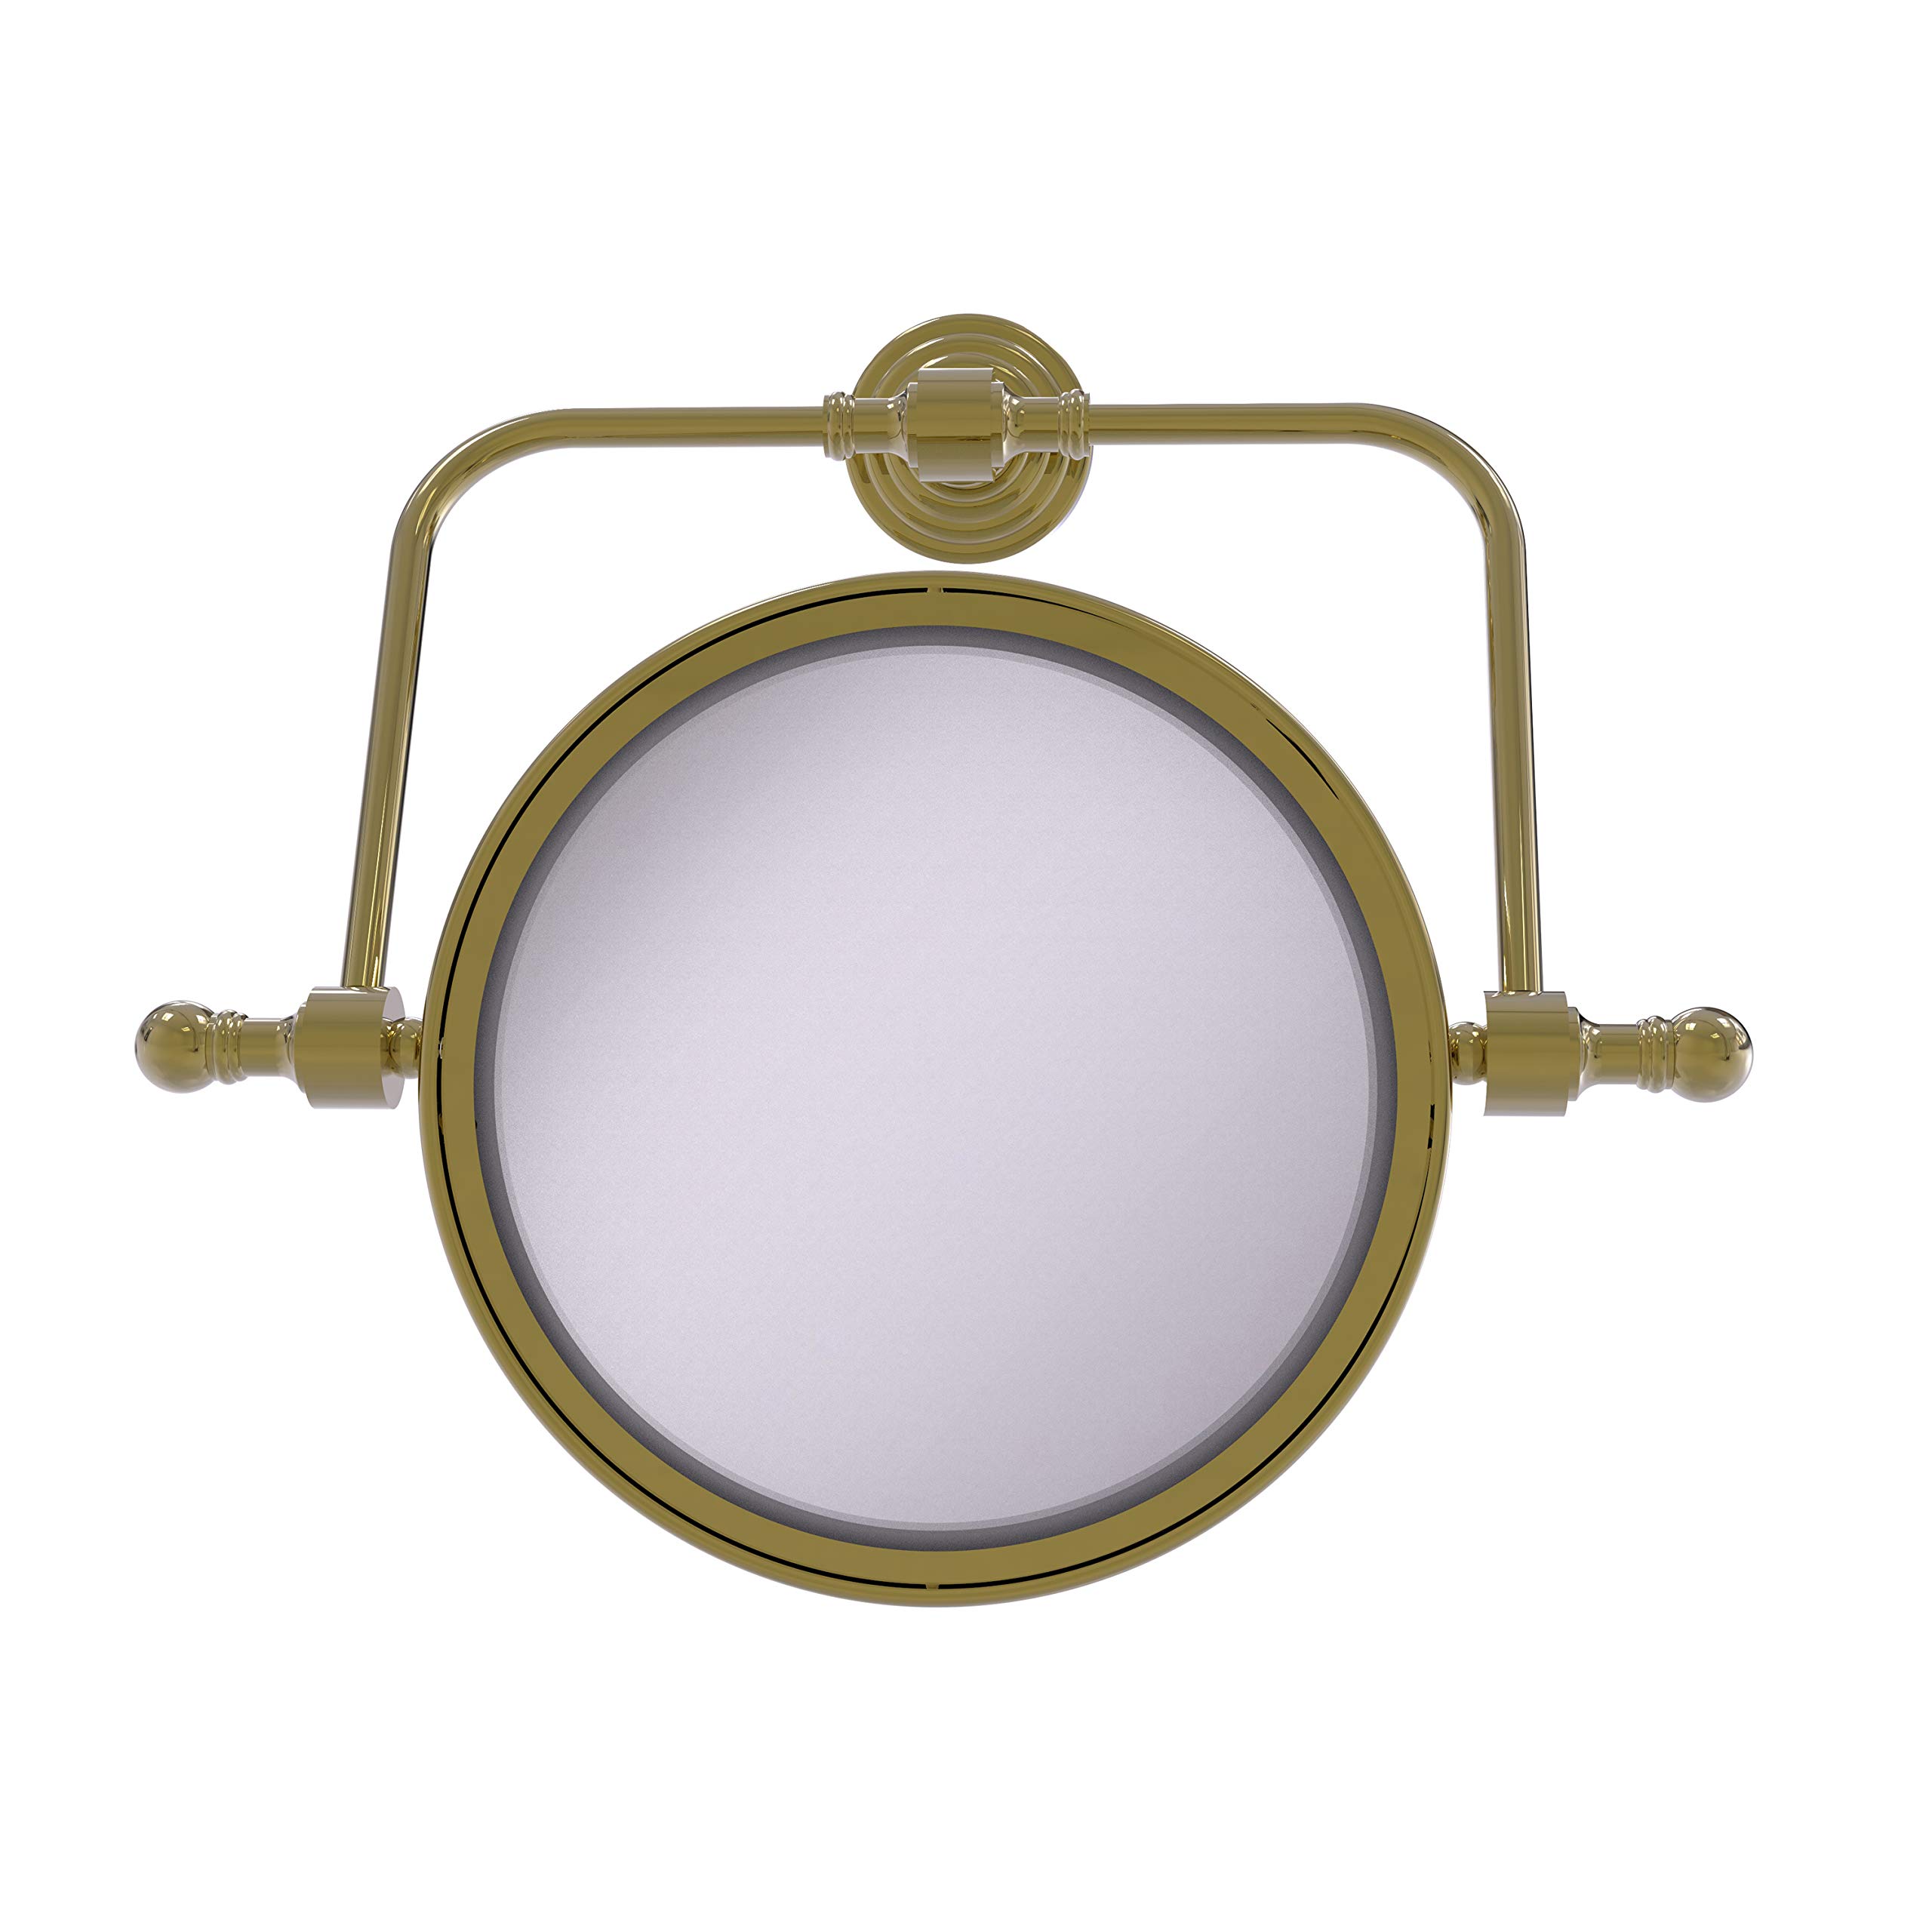 Allied Brass RWM-4/5X Retro Wave Collection Wall Mounted Swivel 8 Inch Diameter with 5X Magnification Make-Up Mirror, Unlacquered Brass